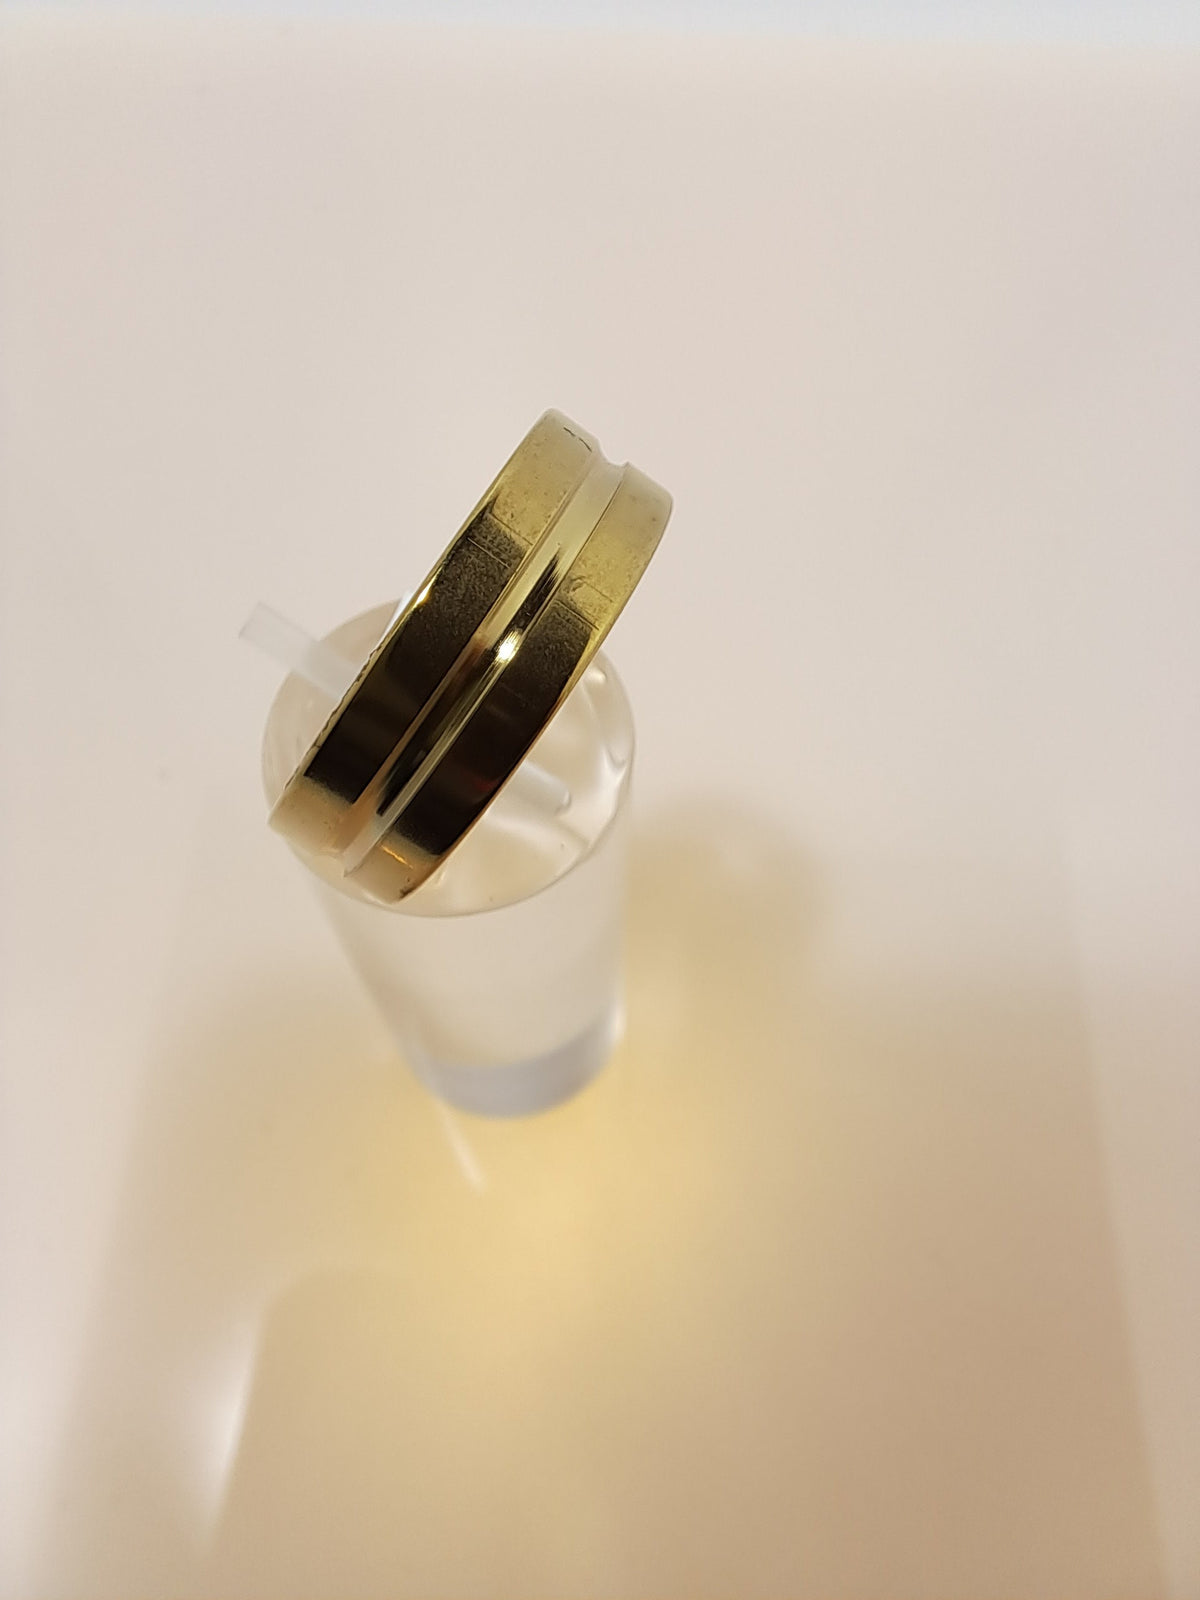 Gold stainless steel unisex ring with a rounded channel around the band. Perfect costume jewellery.